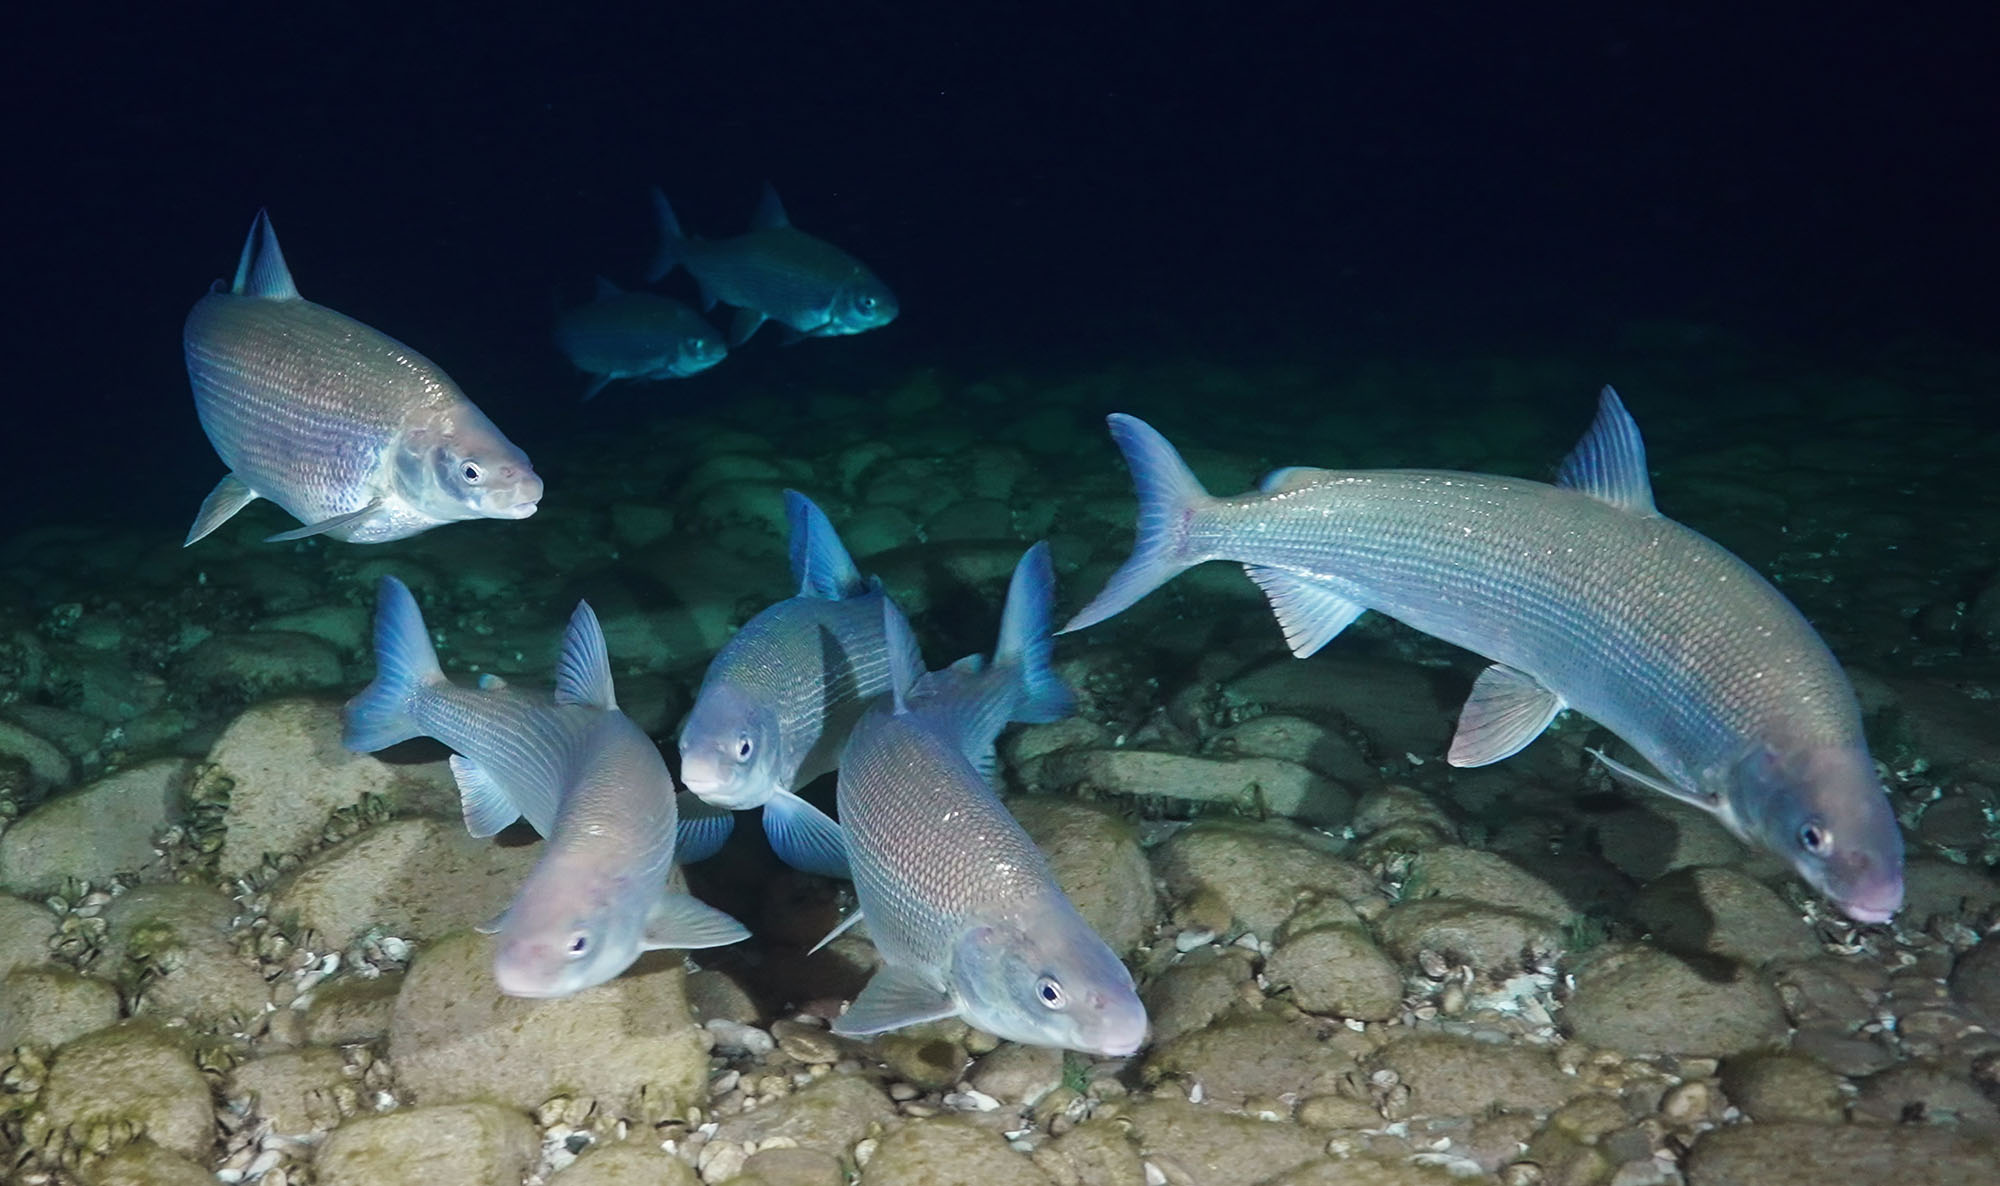 All Too Clear Great Lakes Documentary - Lake Whitefish Spawning - Boxfish ROV Shot. Photo Credit: Inspired Planet Productions